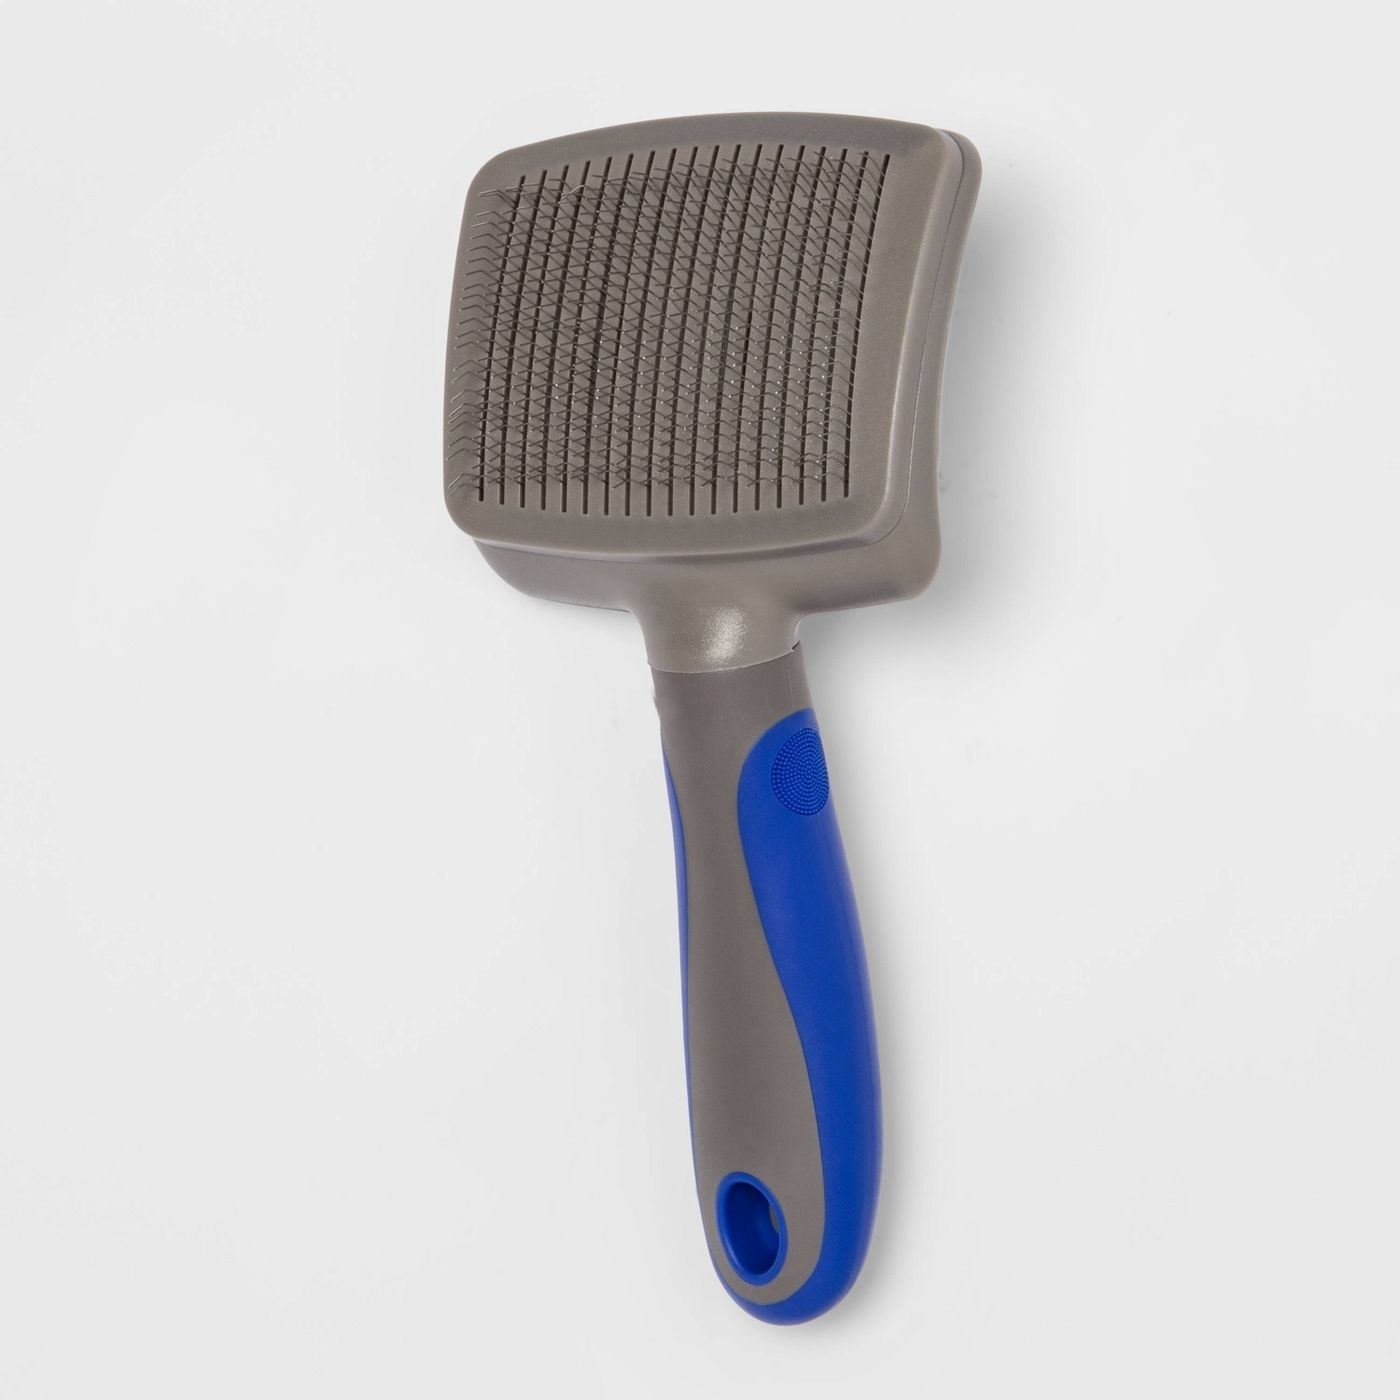 gray and blue dog grooming brush with steel tines